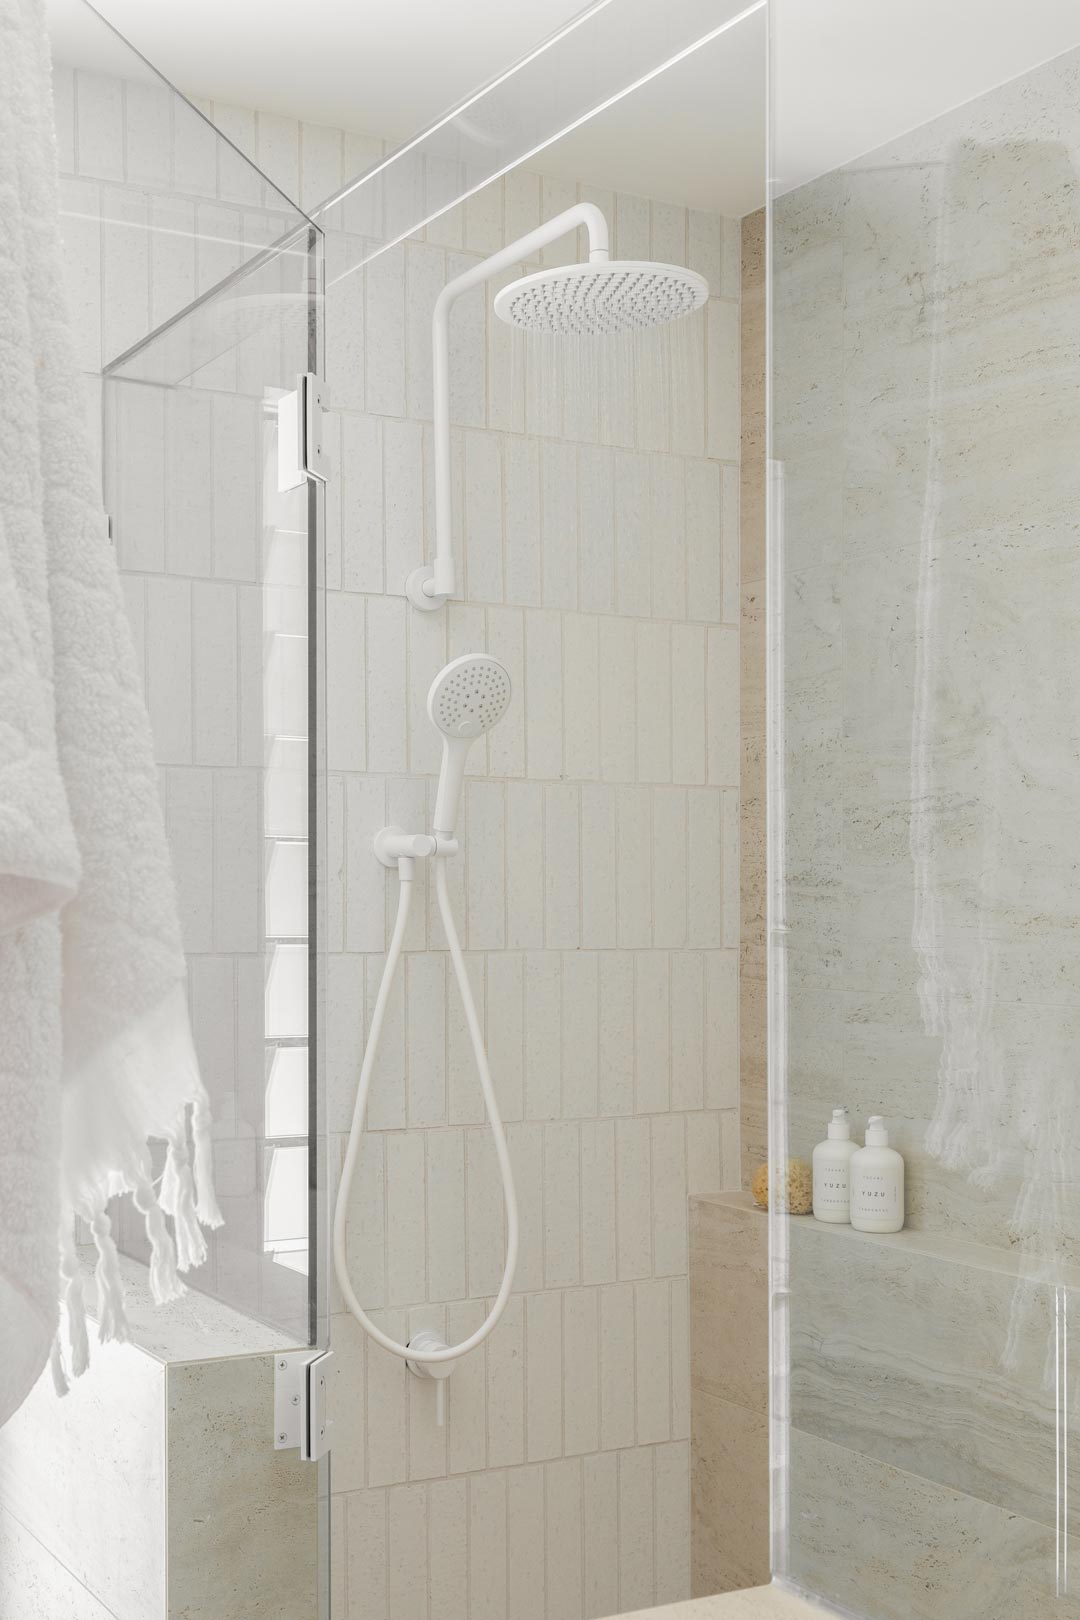 A neutral bathroom with white tapware creates an aesthetic spa like shower experience